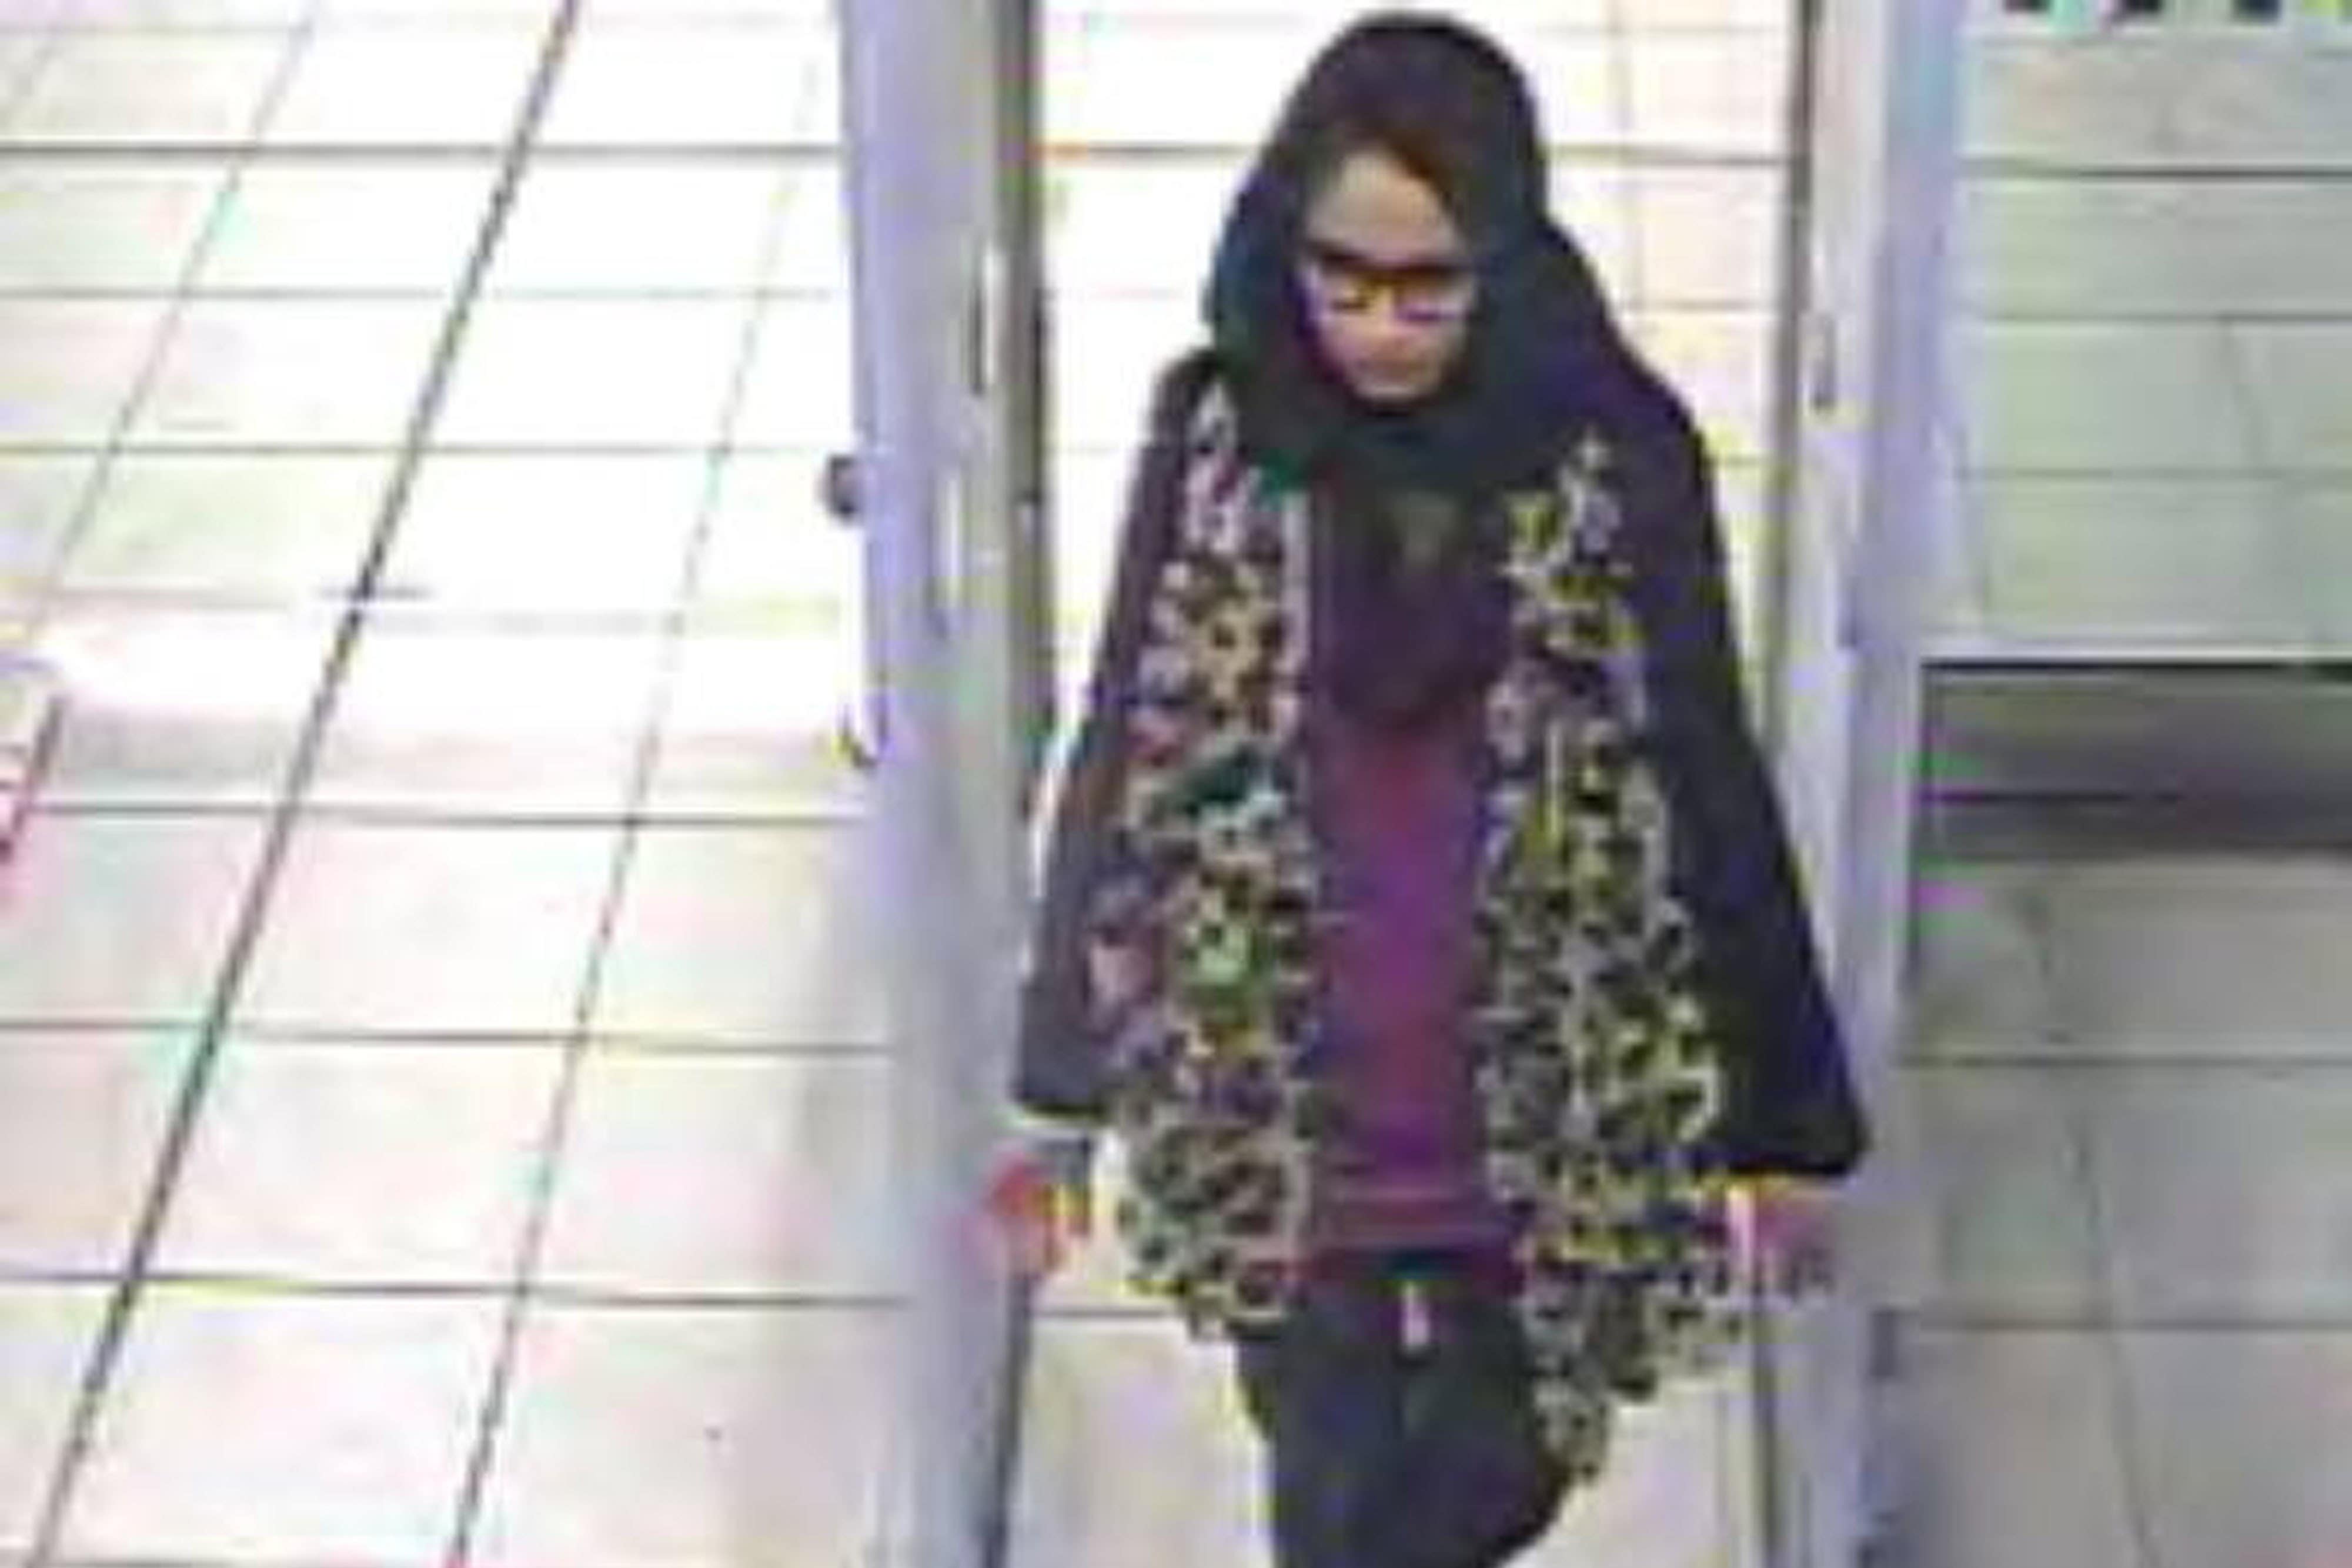 Ms Begum caught on CCTV at Gatwick Airport